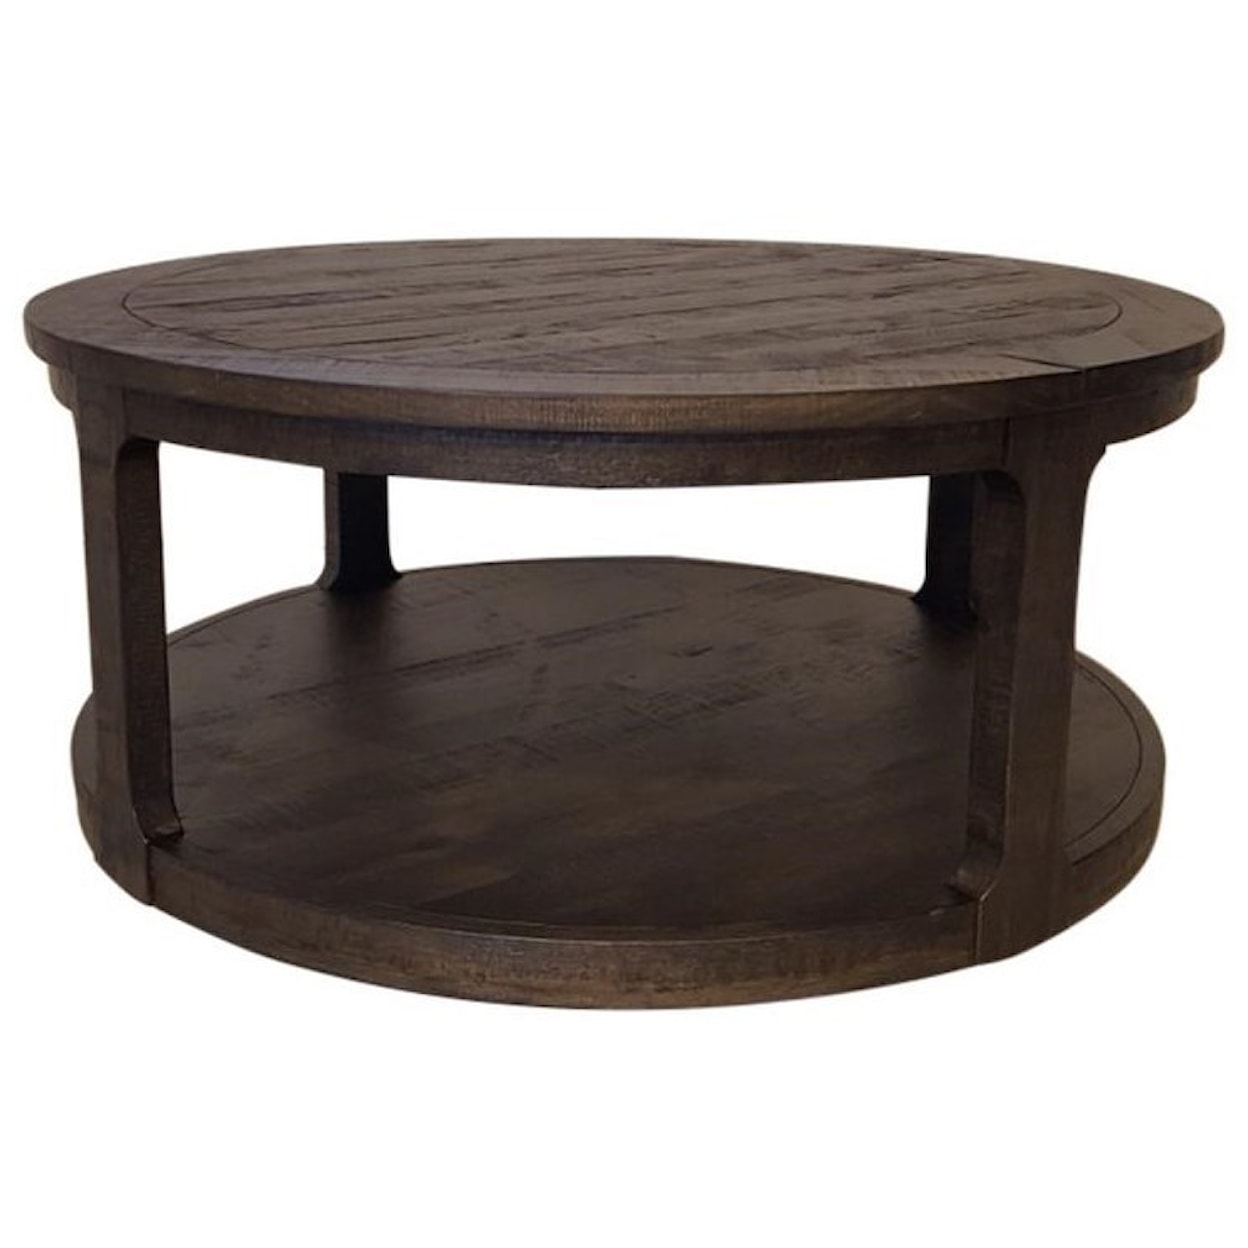 Magnussen Home Boswell Occasional Tables Round Cocktail Table w/Casters